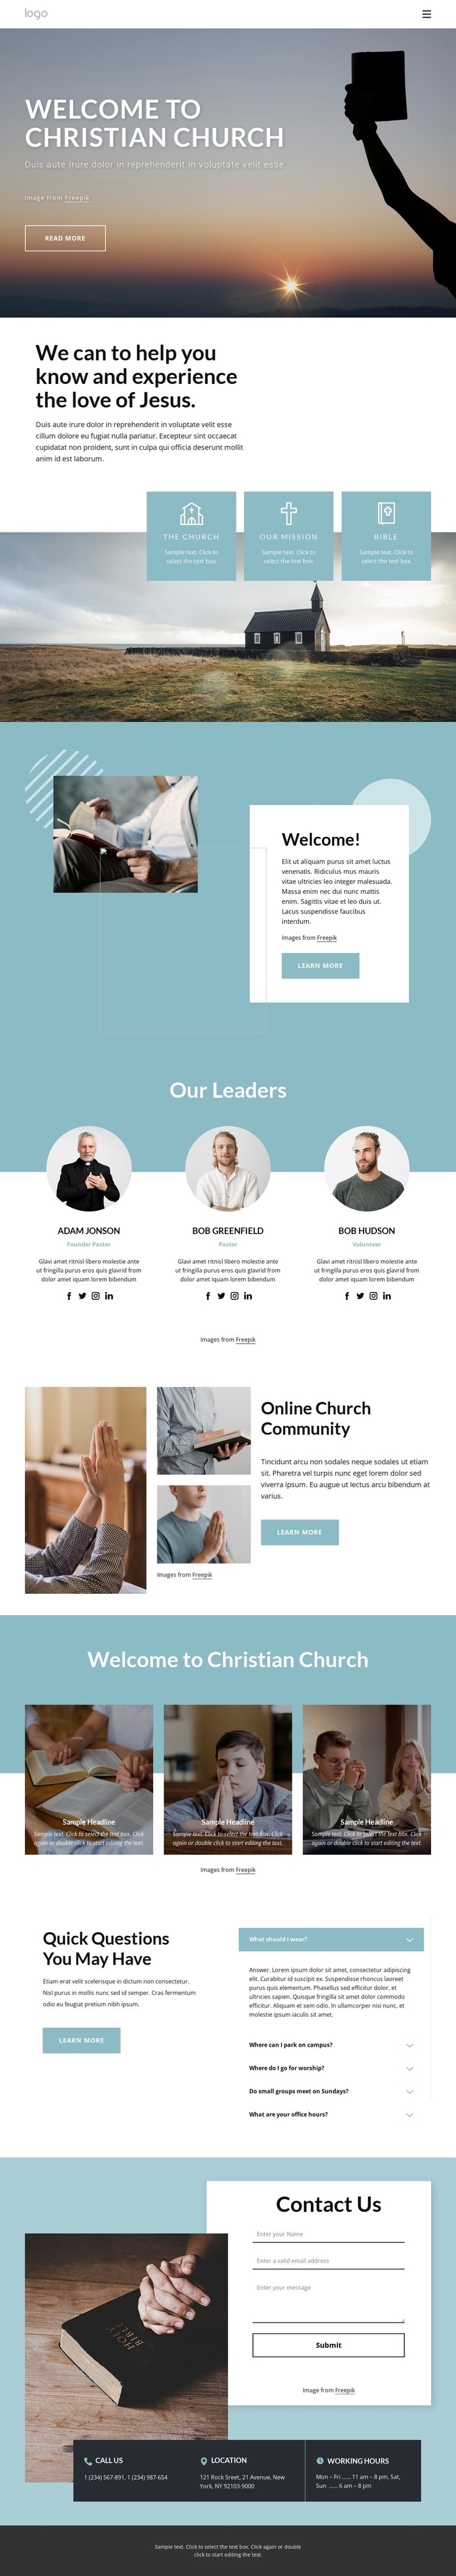 Our Mission, vision and confession Web Page Design